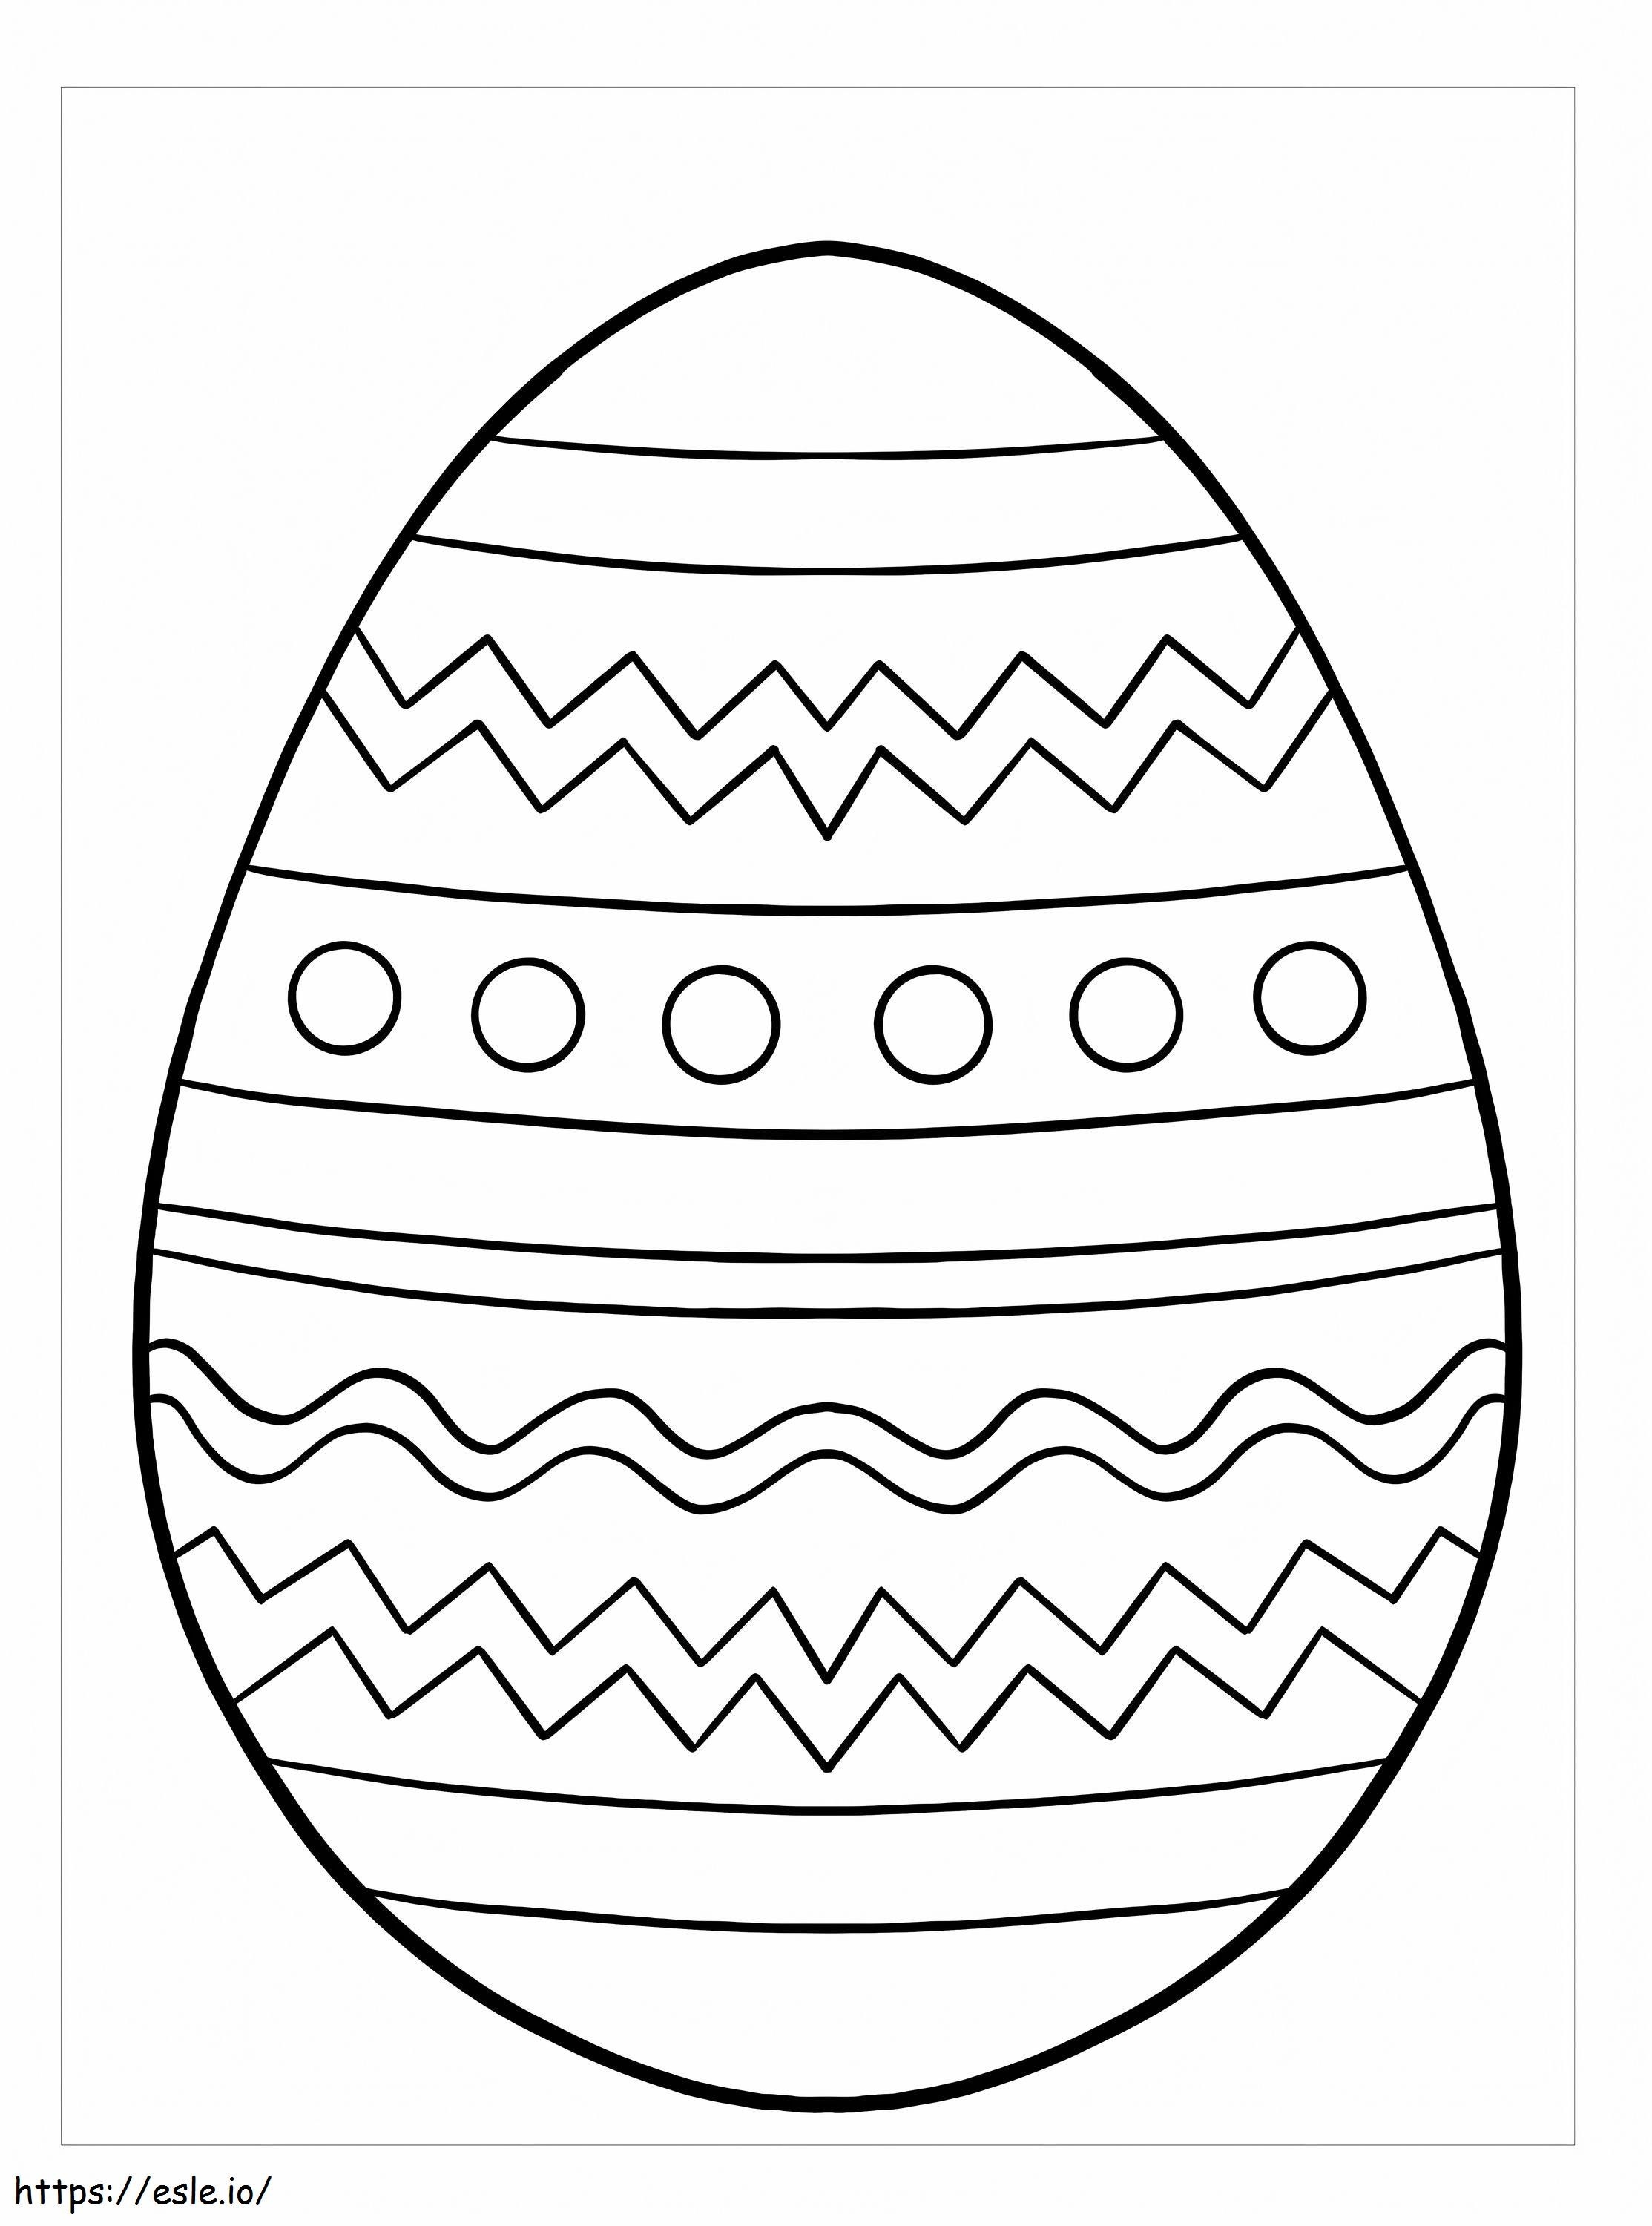 Adorable Easter Egg coloring page